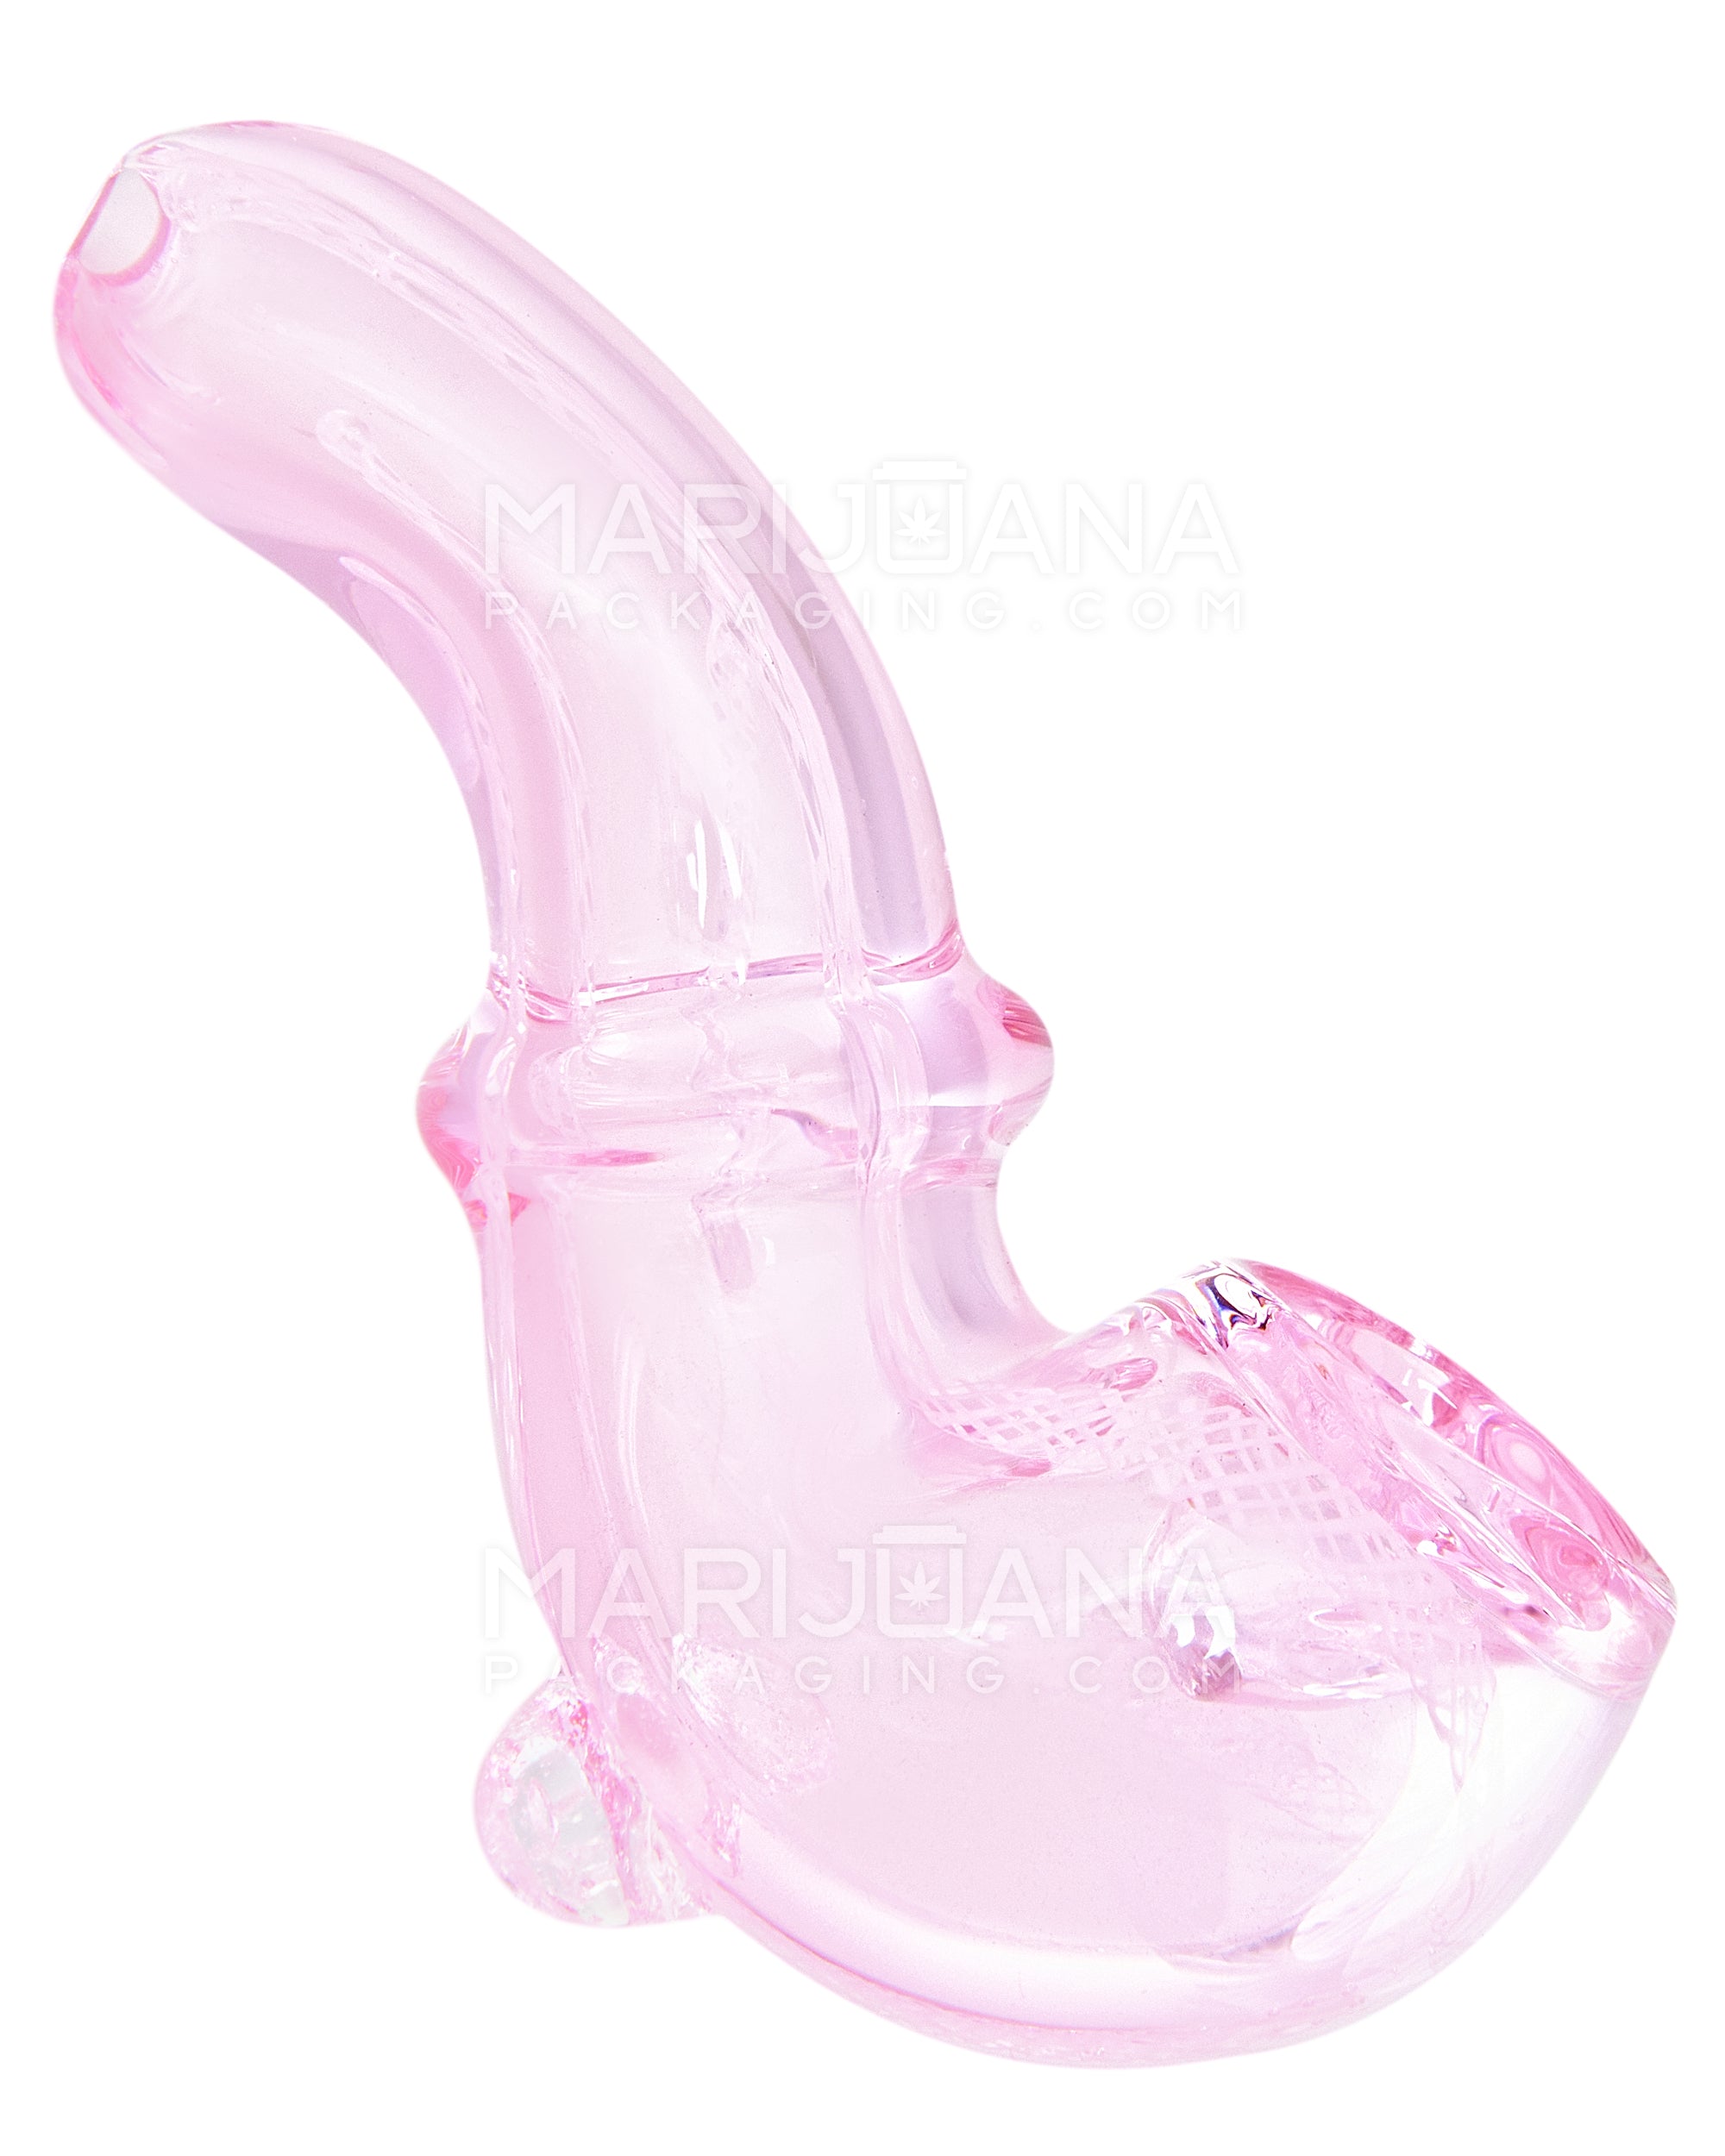 Ringed Sherlock Hand Pipe | 3in Long - Glass - Pink - 1